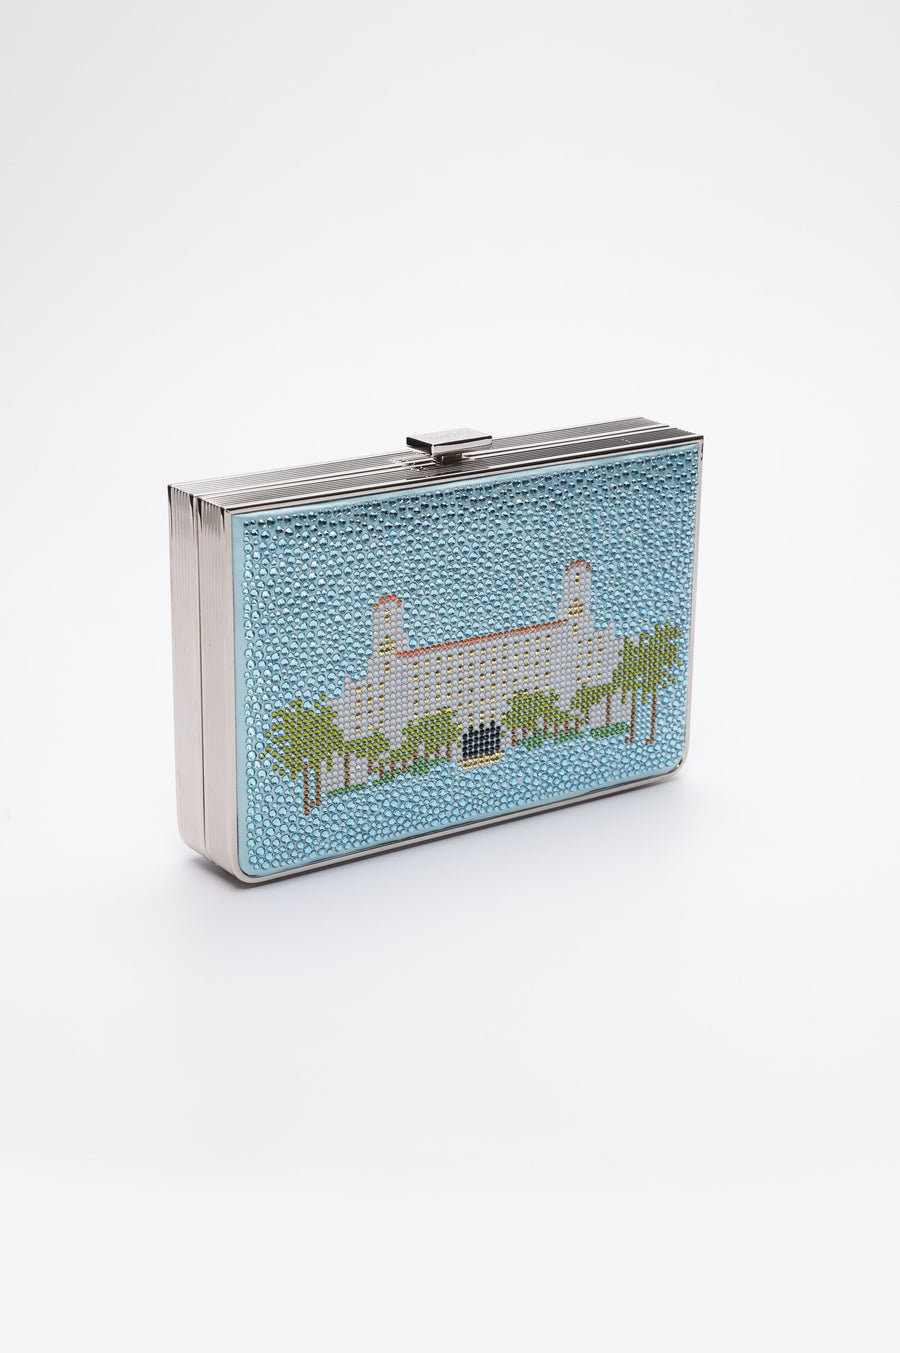 A Breakers Crystal Rhinestone Clutch from The Bella Rosa Collection, inspired by Palm Beach, with a blue building on it.